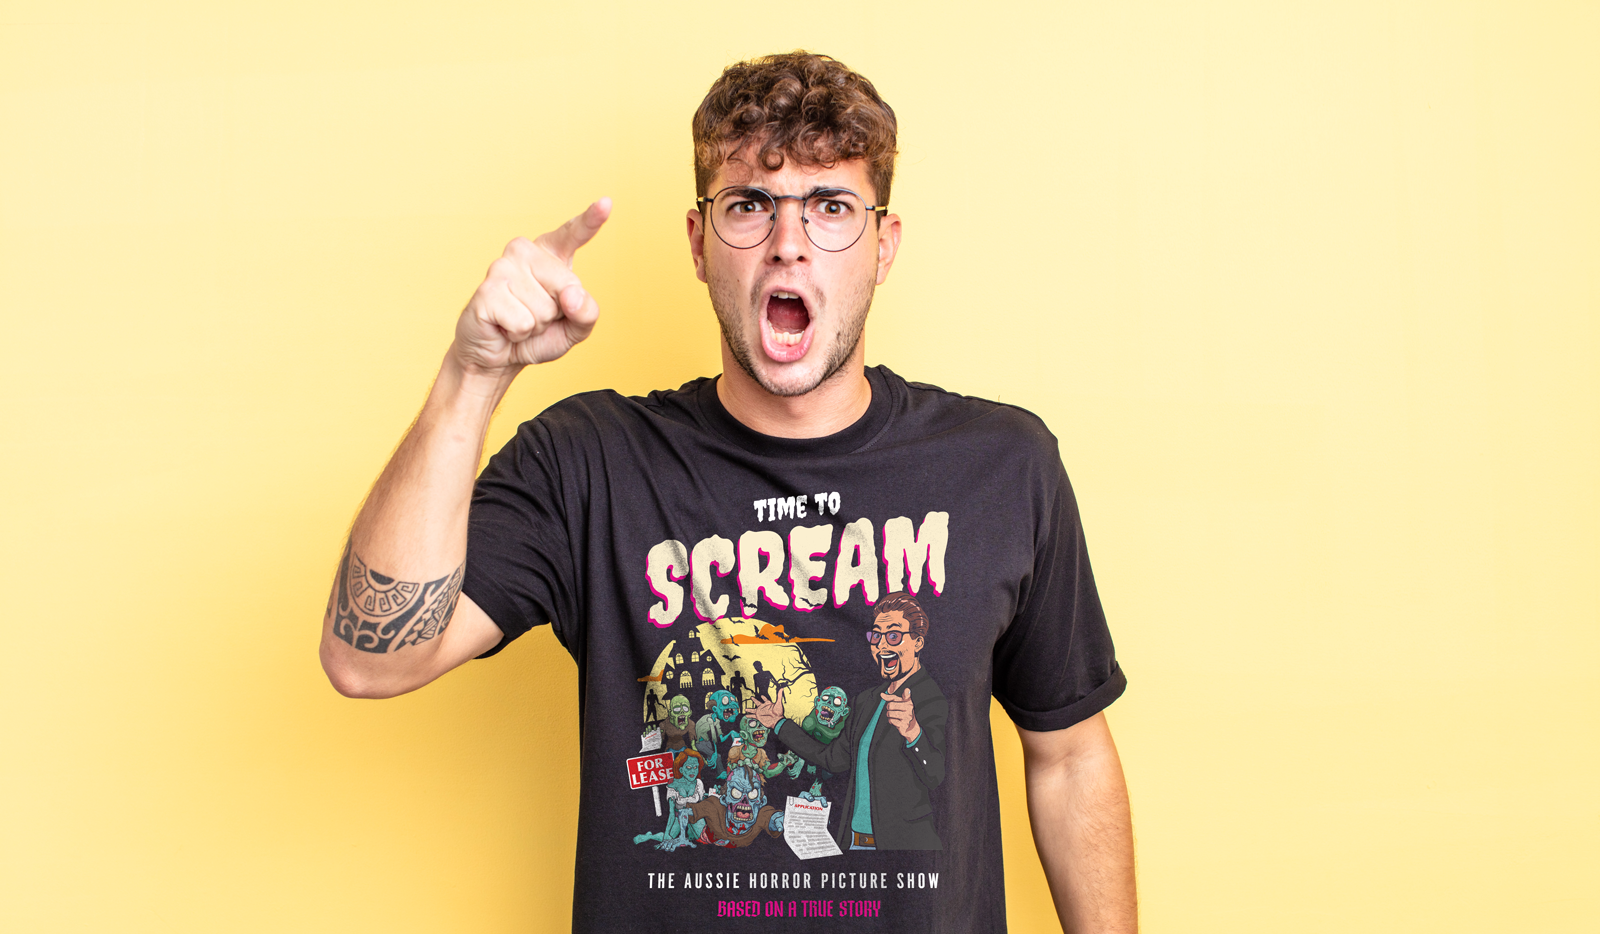 SWAG COST OF LIVING HORROR SHOW T-SHIRT - RENTING